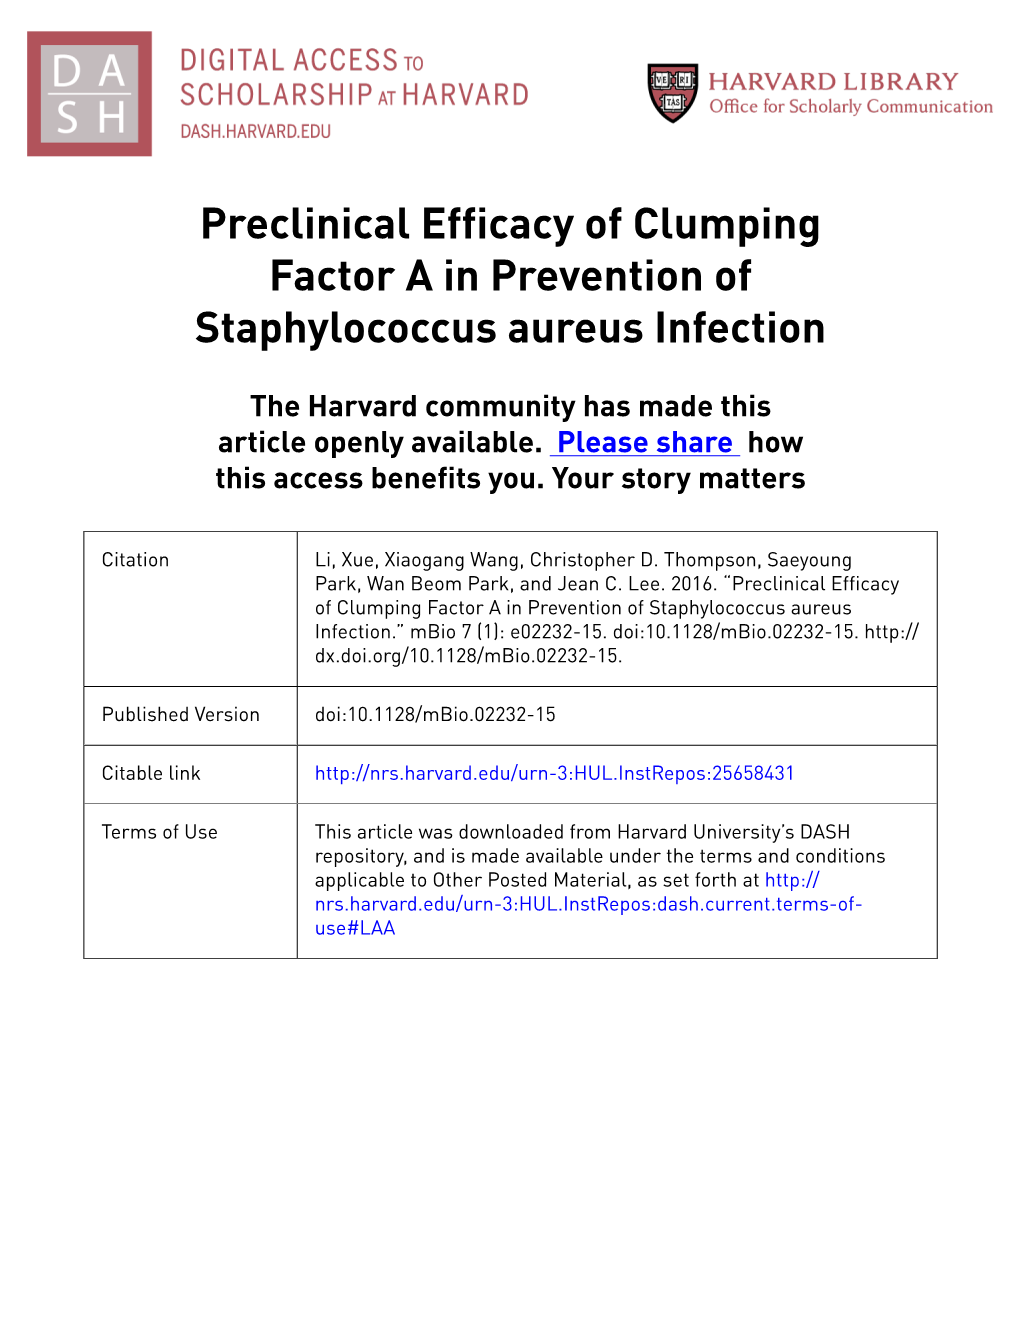 Preclinical Efficacy of Clumping Factor a in Prevention of Staphylococcus Aureus Infection